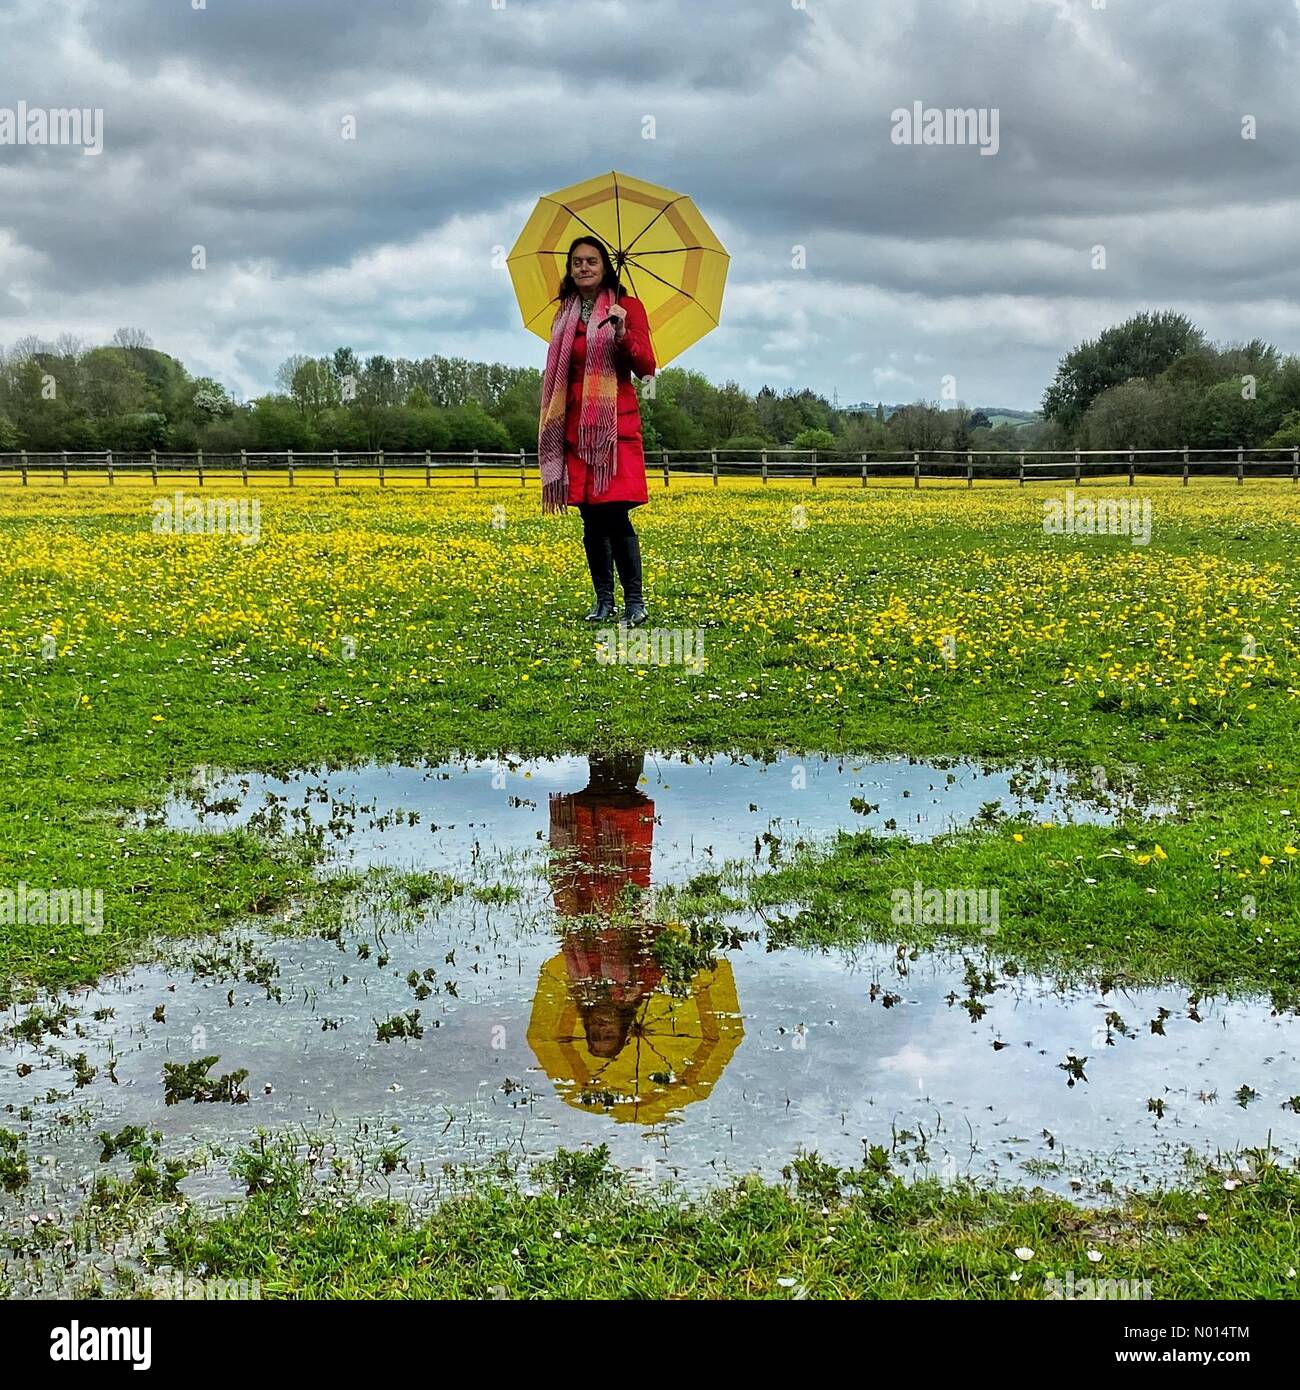 Alphington, Exeter, Devon, UK. 14th May, 2021. Colourful Raich Keene in blooming buttercups under grey clouds in Alphington. Credit: nidpor: Alamy Live News Stock Photo